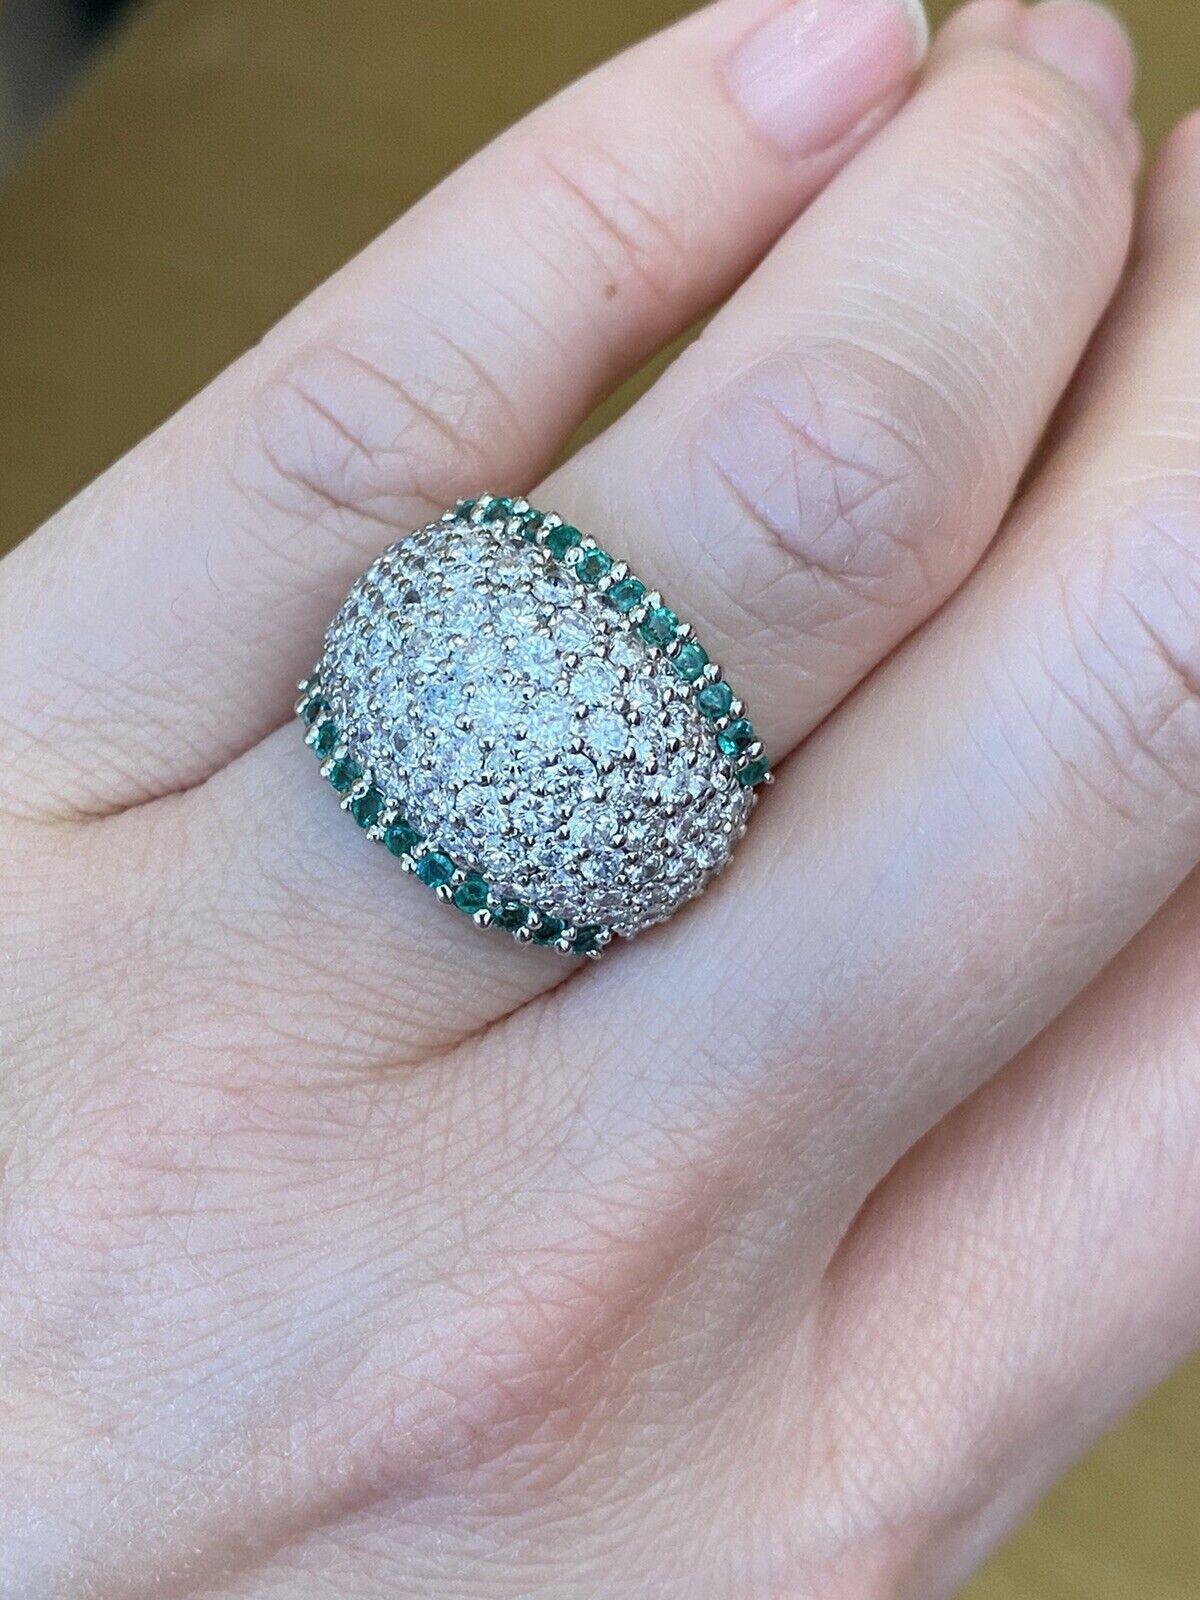 Emerald and Diamond Pavé Dome Ring in Platinum

Emerald and Diamond Pavé Dome Ring features 22 bright and lively Green Round Emeralds in two rows along the edge of the ring complemented by 3.36 carats of Round Diamonds in five rows across the middle